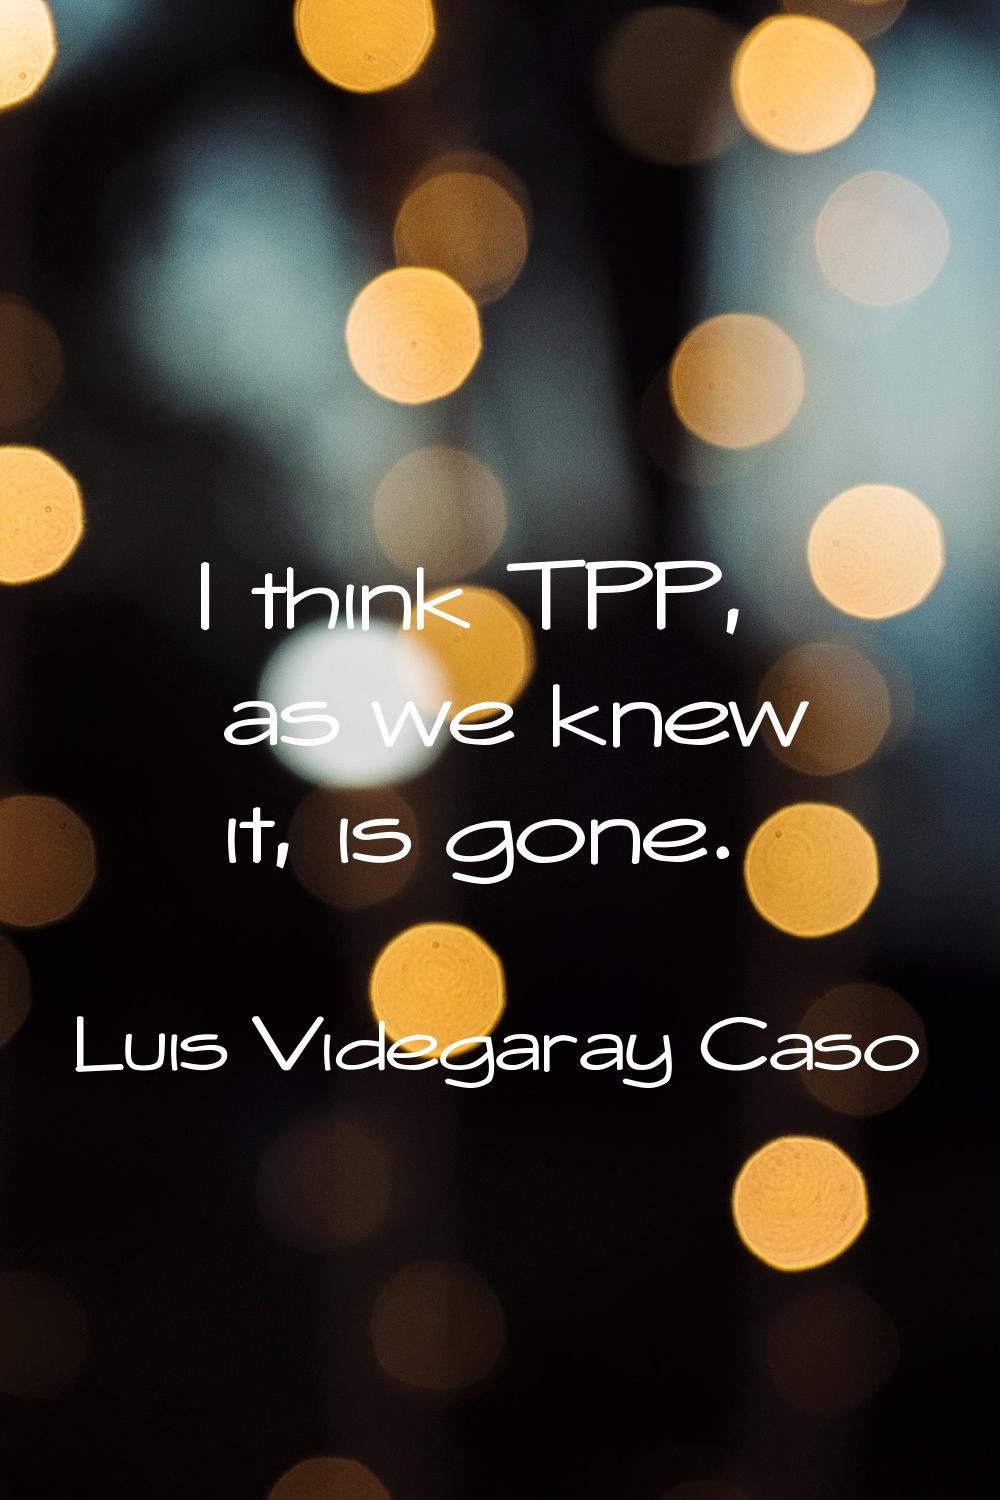 I think TPP, as we knew it, is gone.